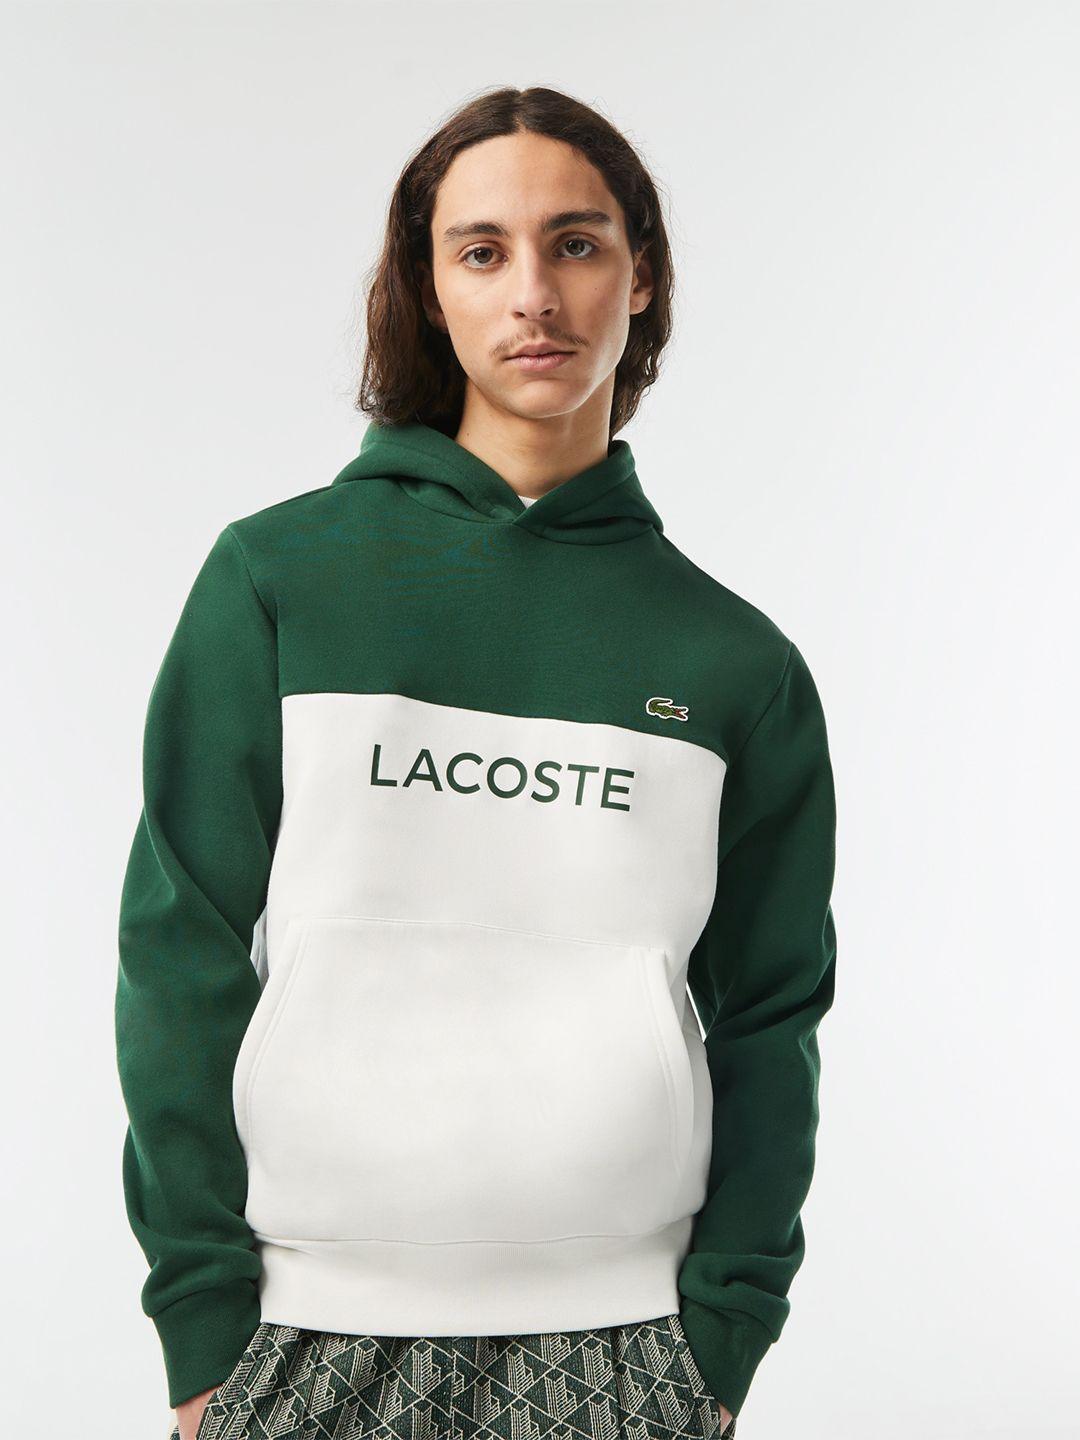 lacoste-colourblocked-knitted-hooded-pullover-sweatshirt